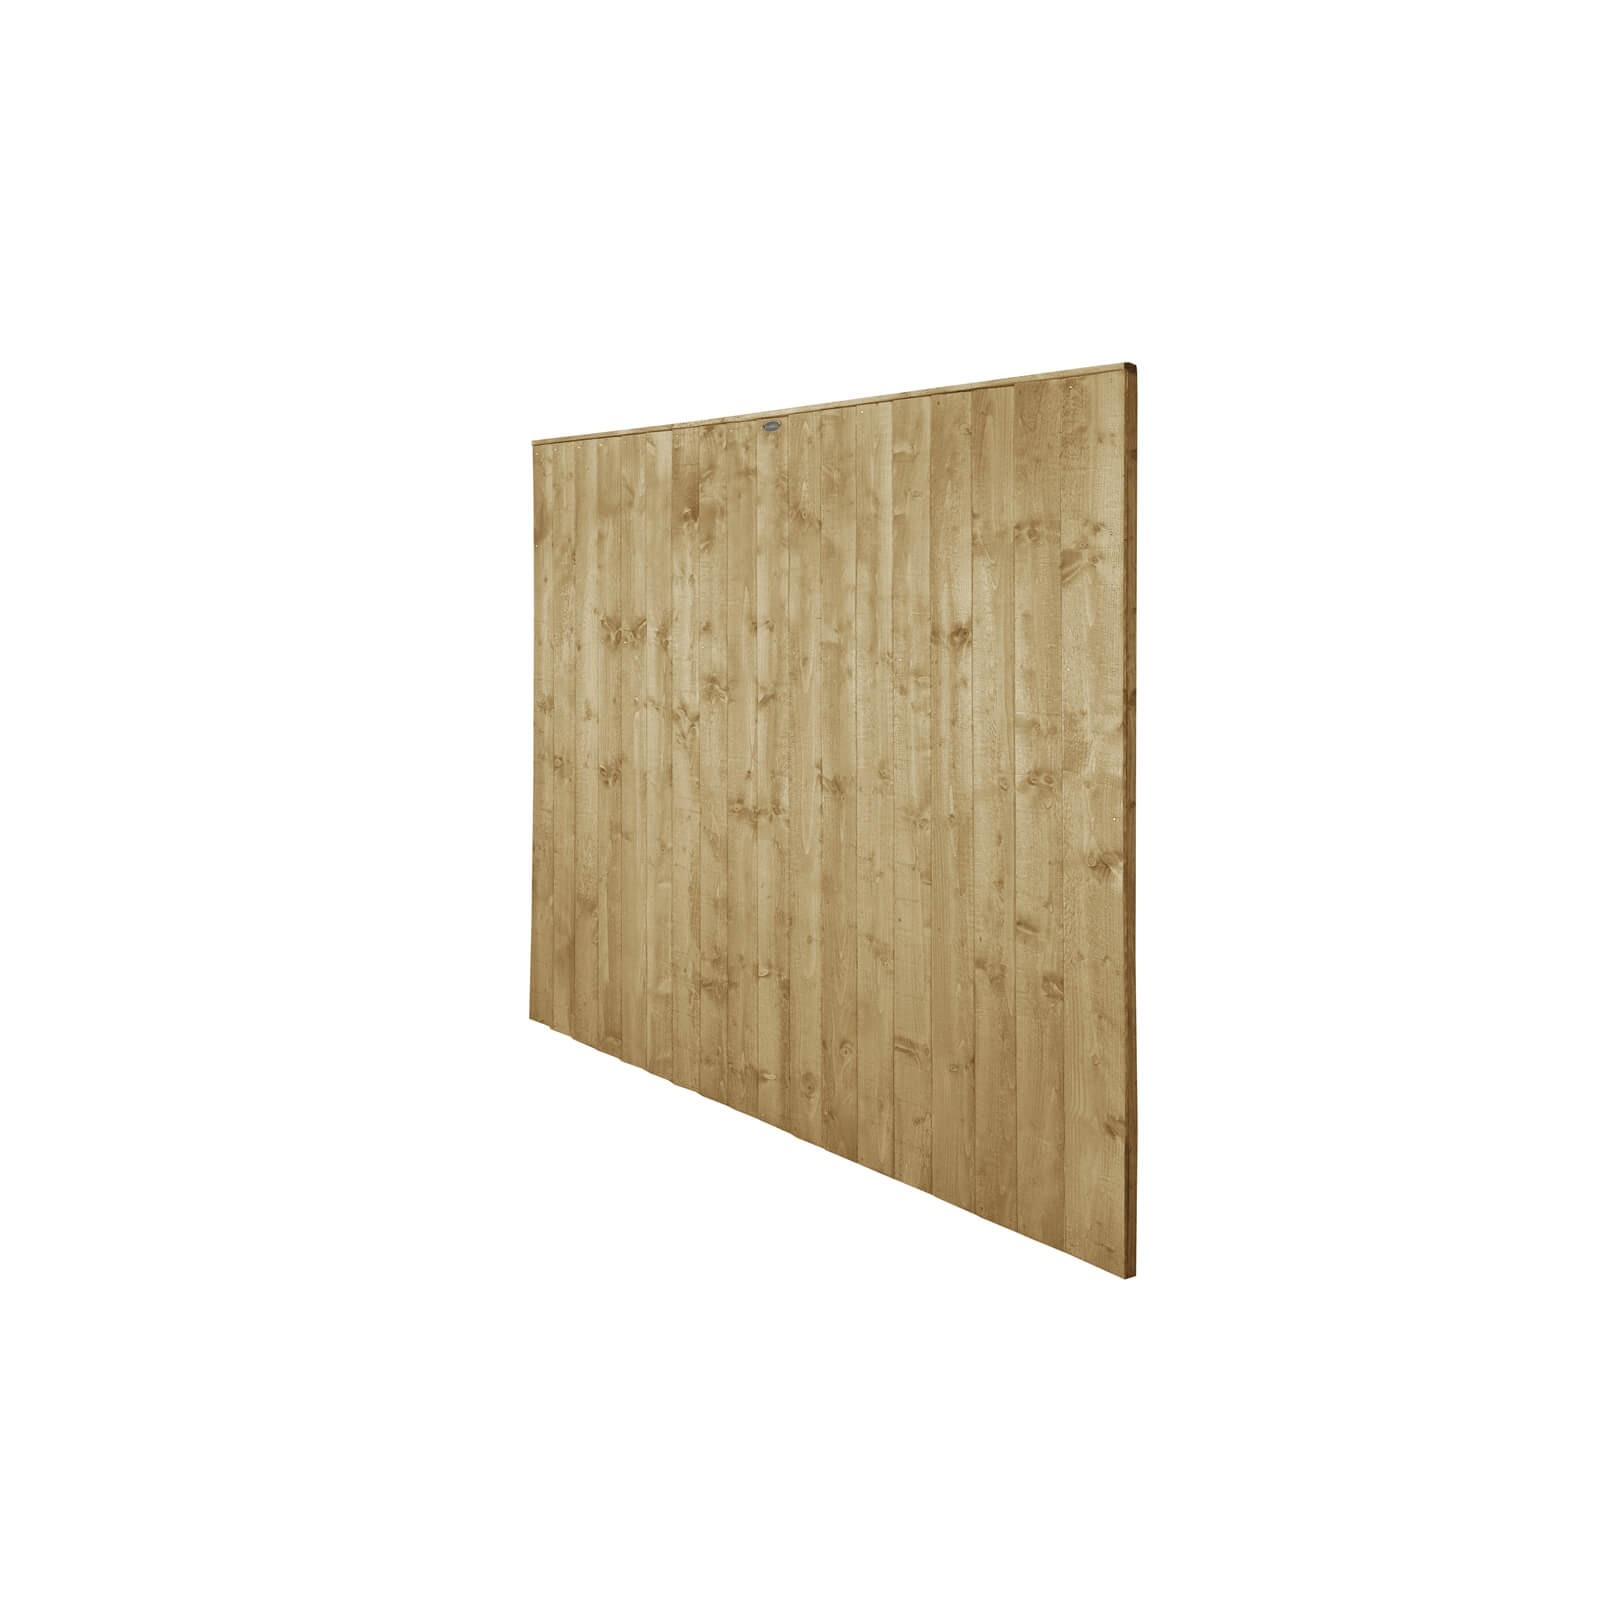 6ft x 6ft (1.83m x 1.85m) Pressure Treated Featheredge Fence Panel - Pack of 3